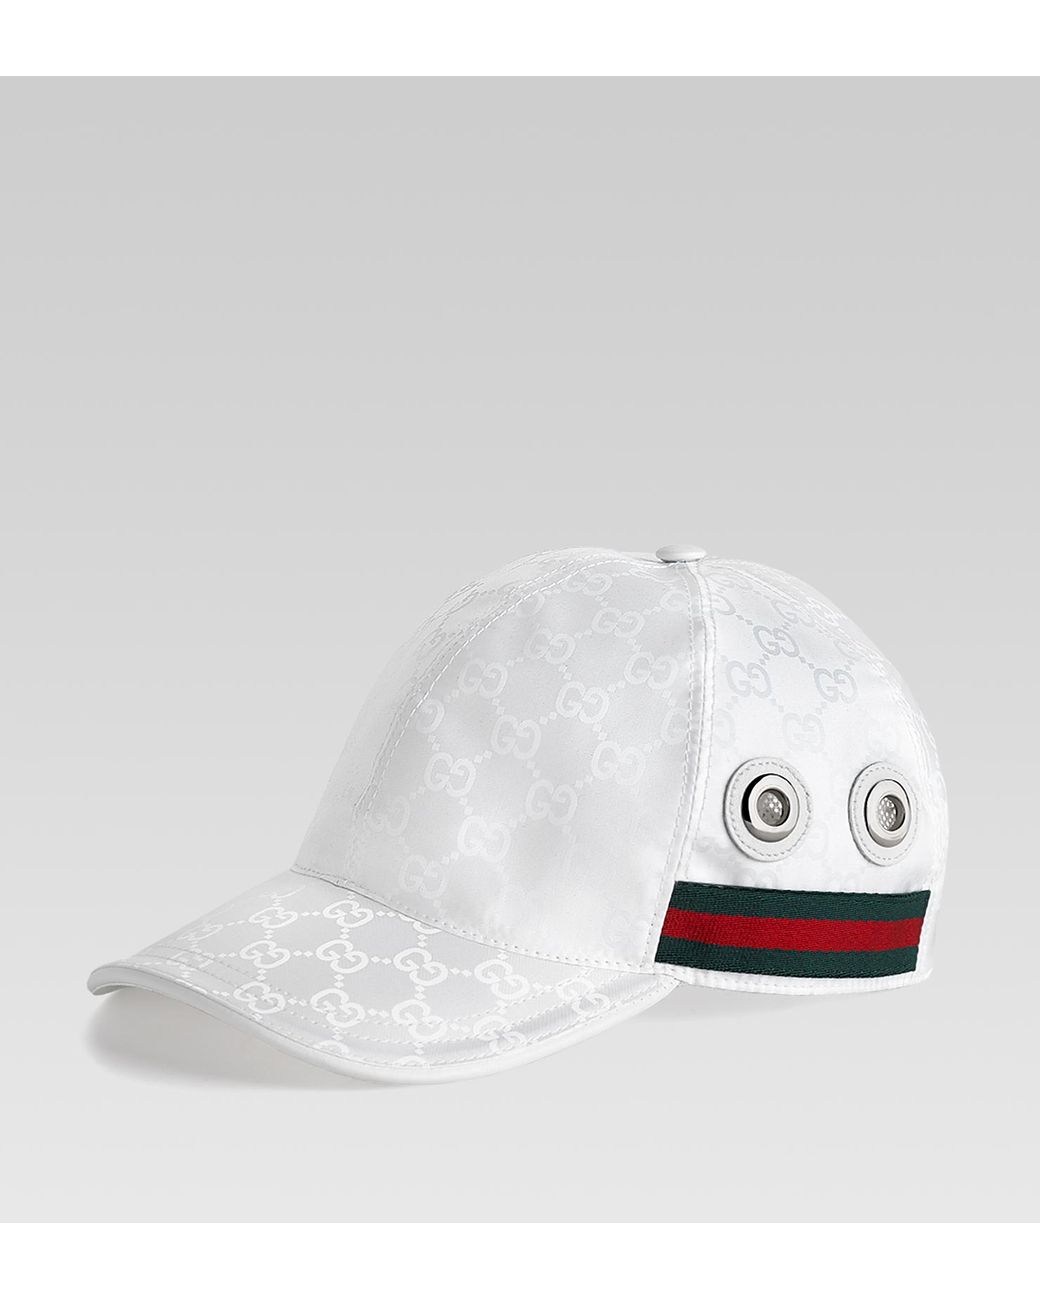 Gucci Baseball Hat with Grommets and Adjustable Hookandloop Closure in White  for Men